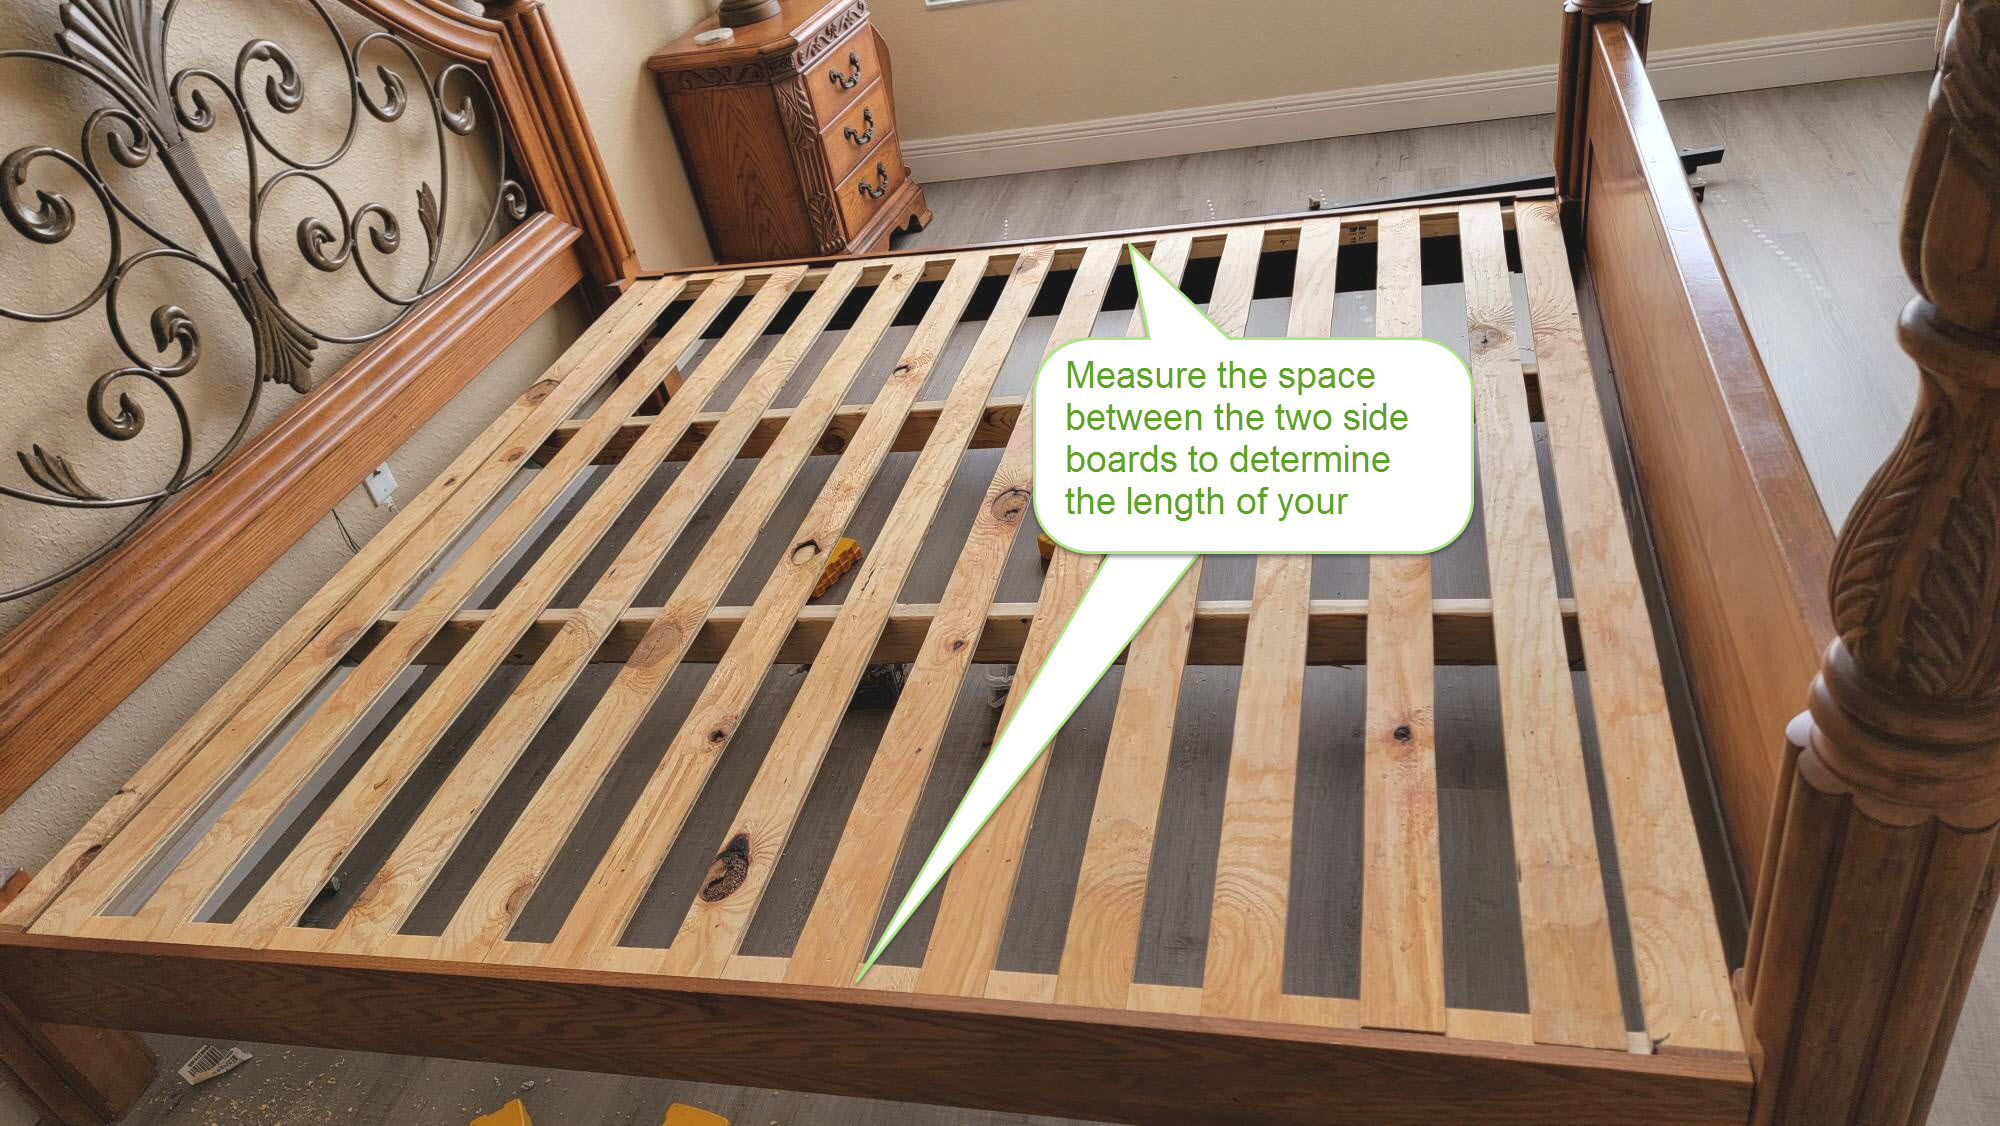 Converting a Box Spring To A Platform Bed - Measure the space between the side boards